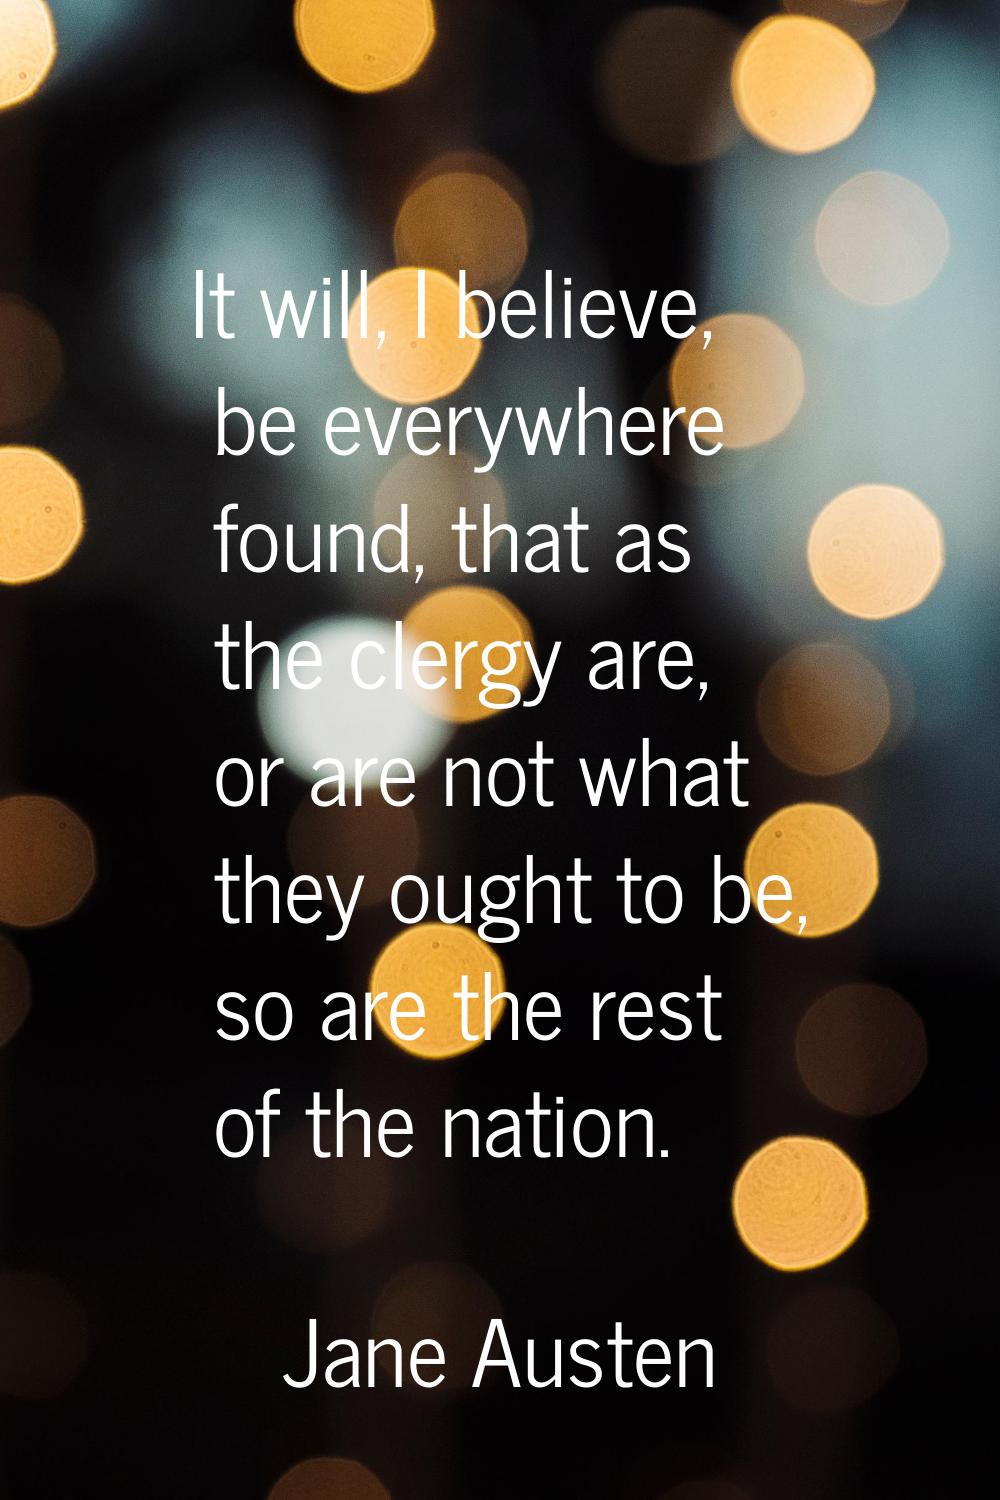 It will, I believe, be everywhere found, that as the clergy are, or are not what they ought to be, 